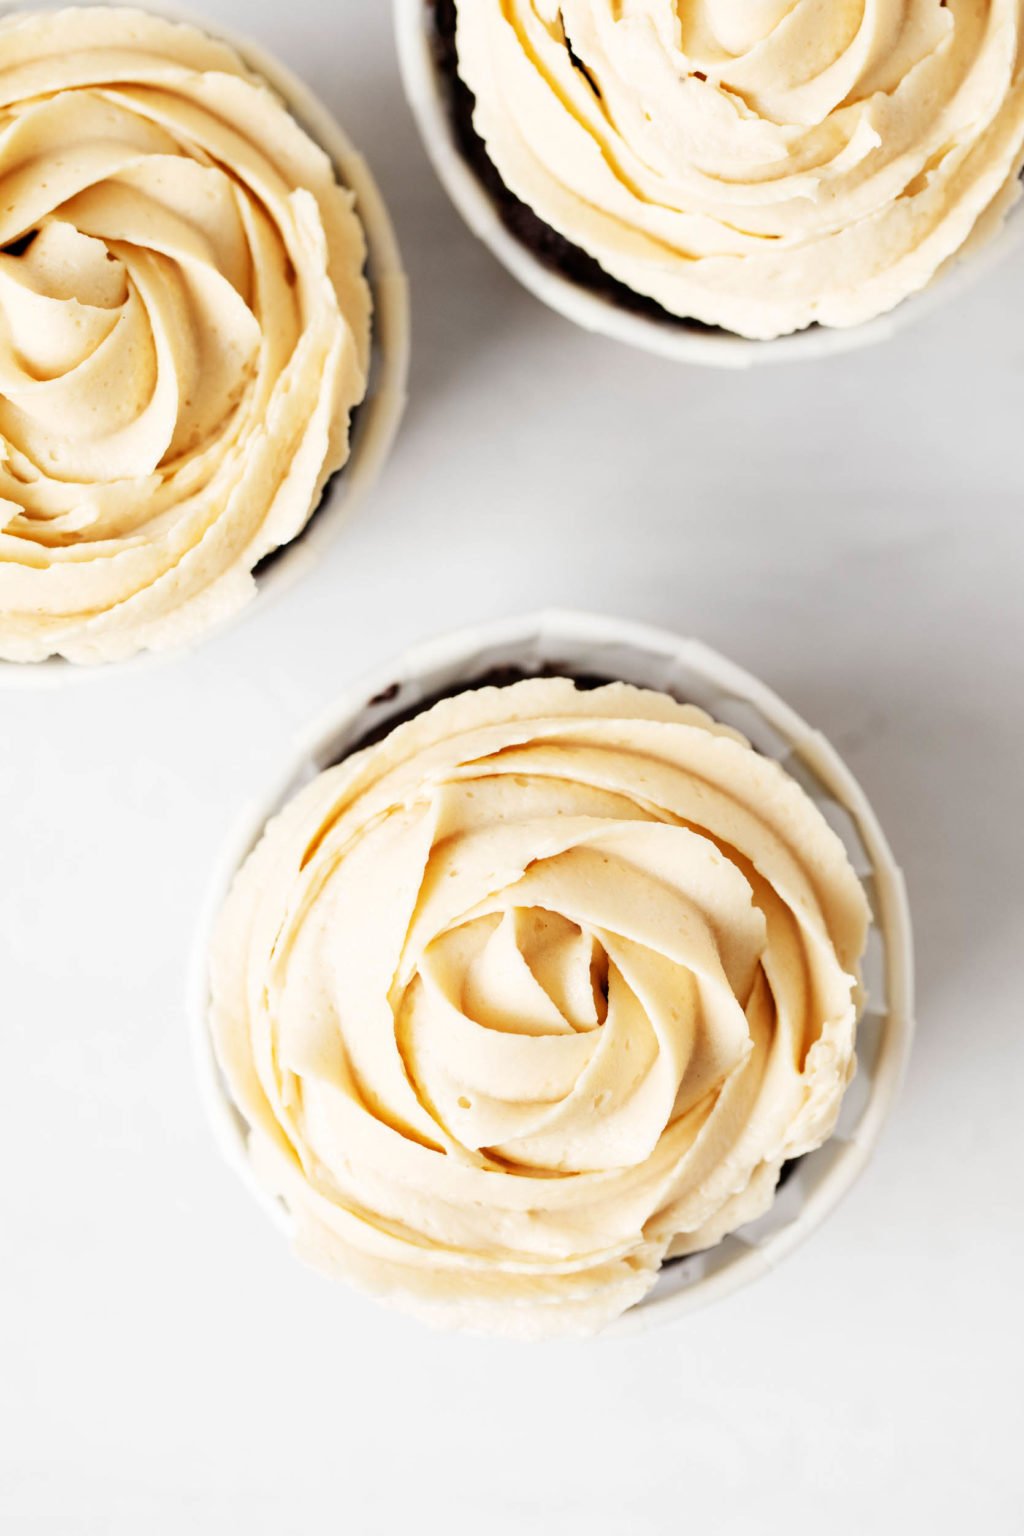 The top of a few cupcakes, which have been piped with a light-colored buttercream frosting.